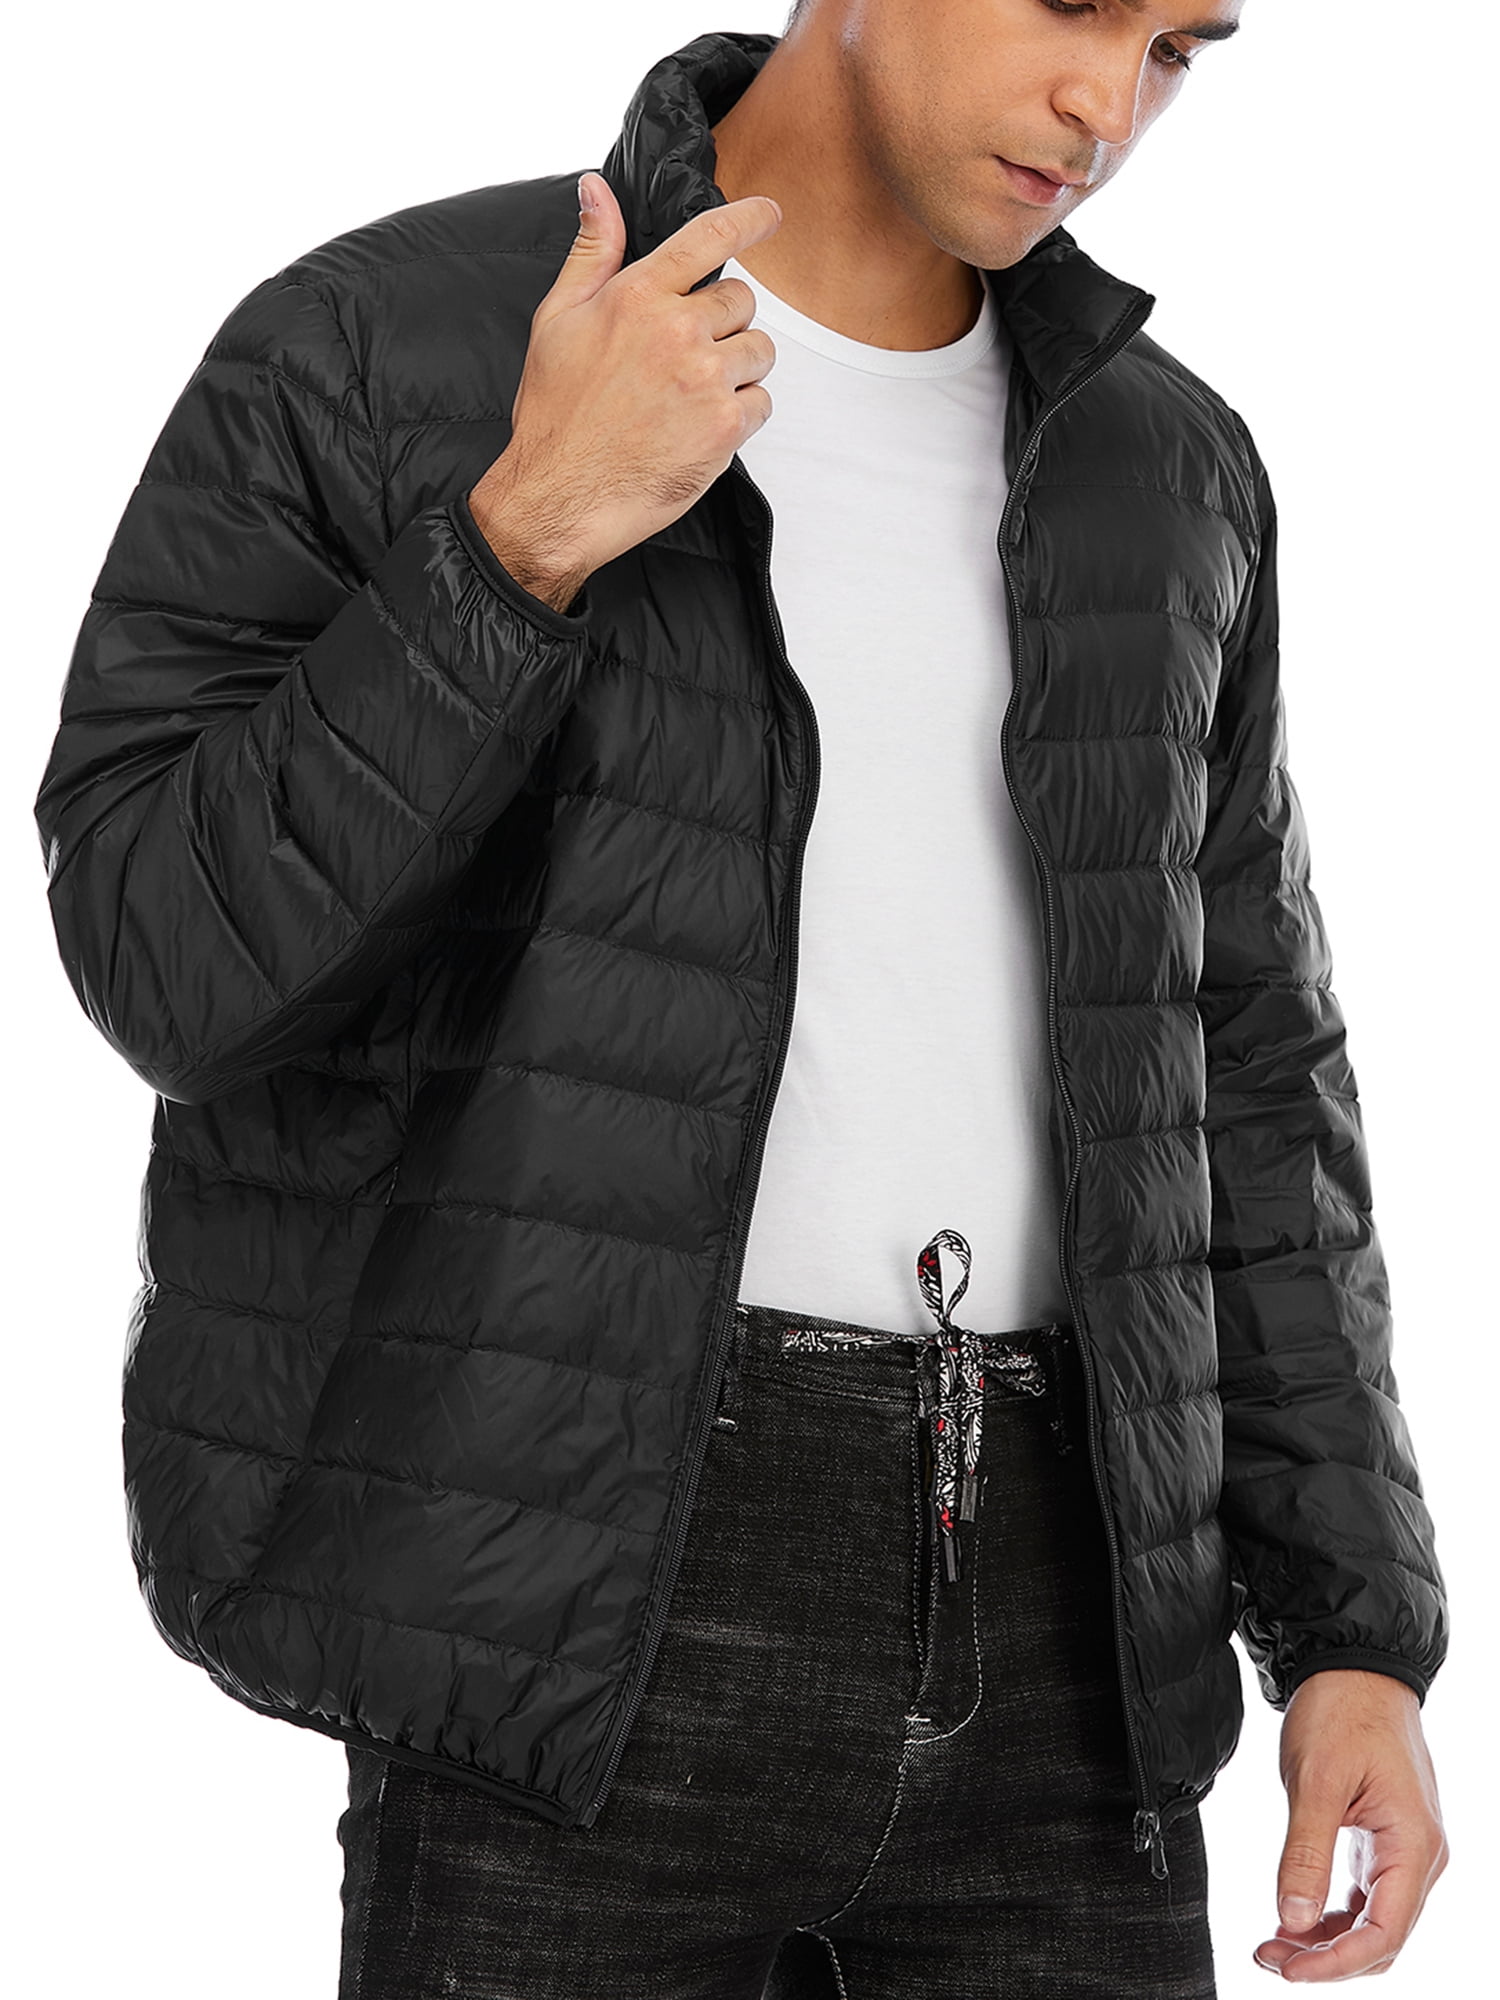 Big & Tall Men's Packable Down Jacket Casual Collared Lightweight ...